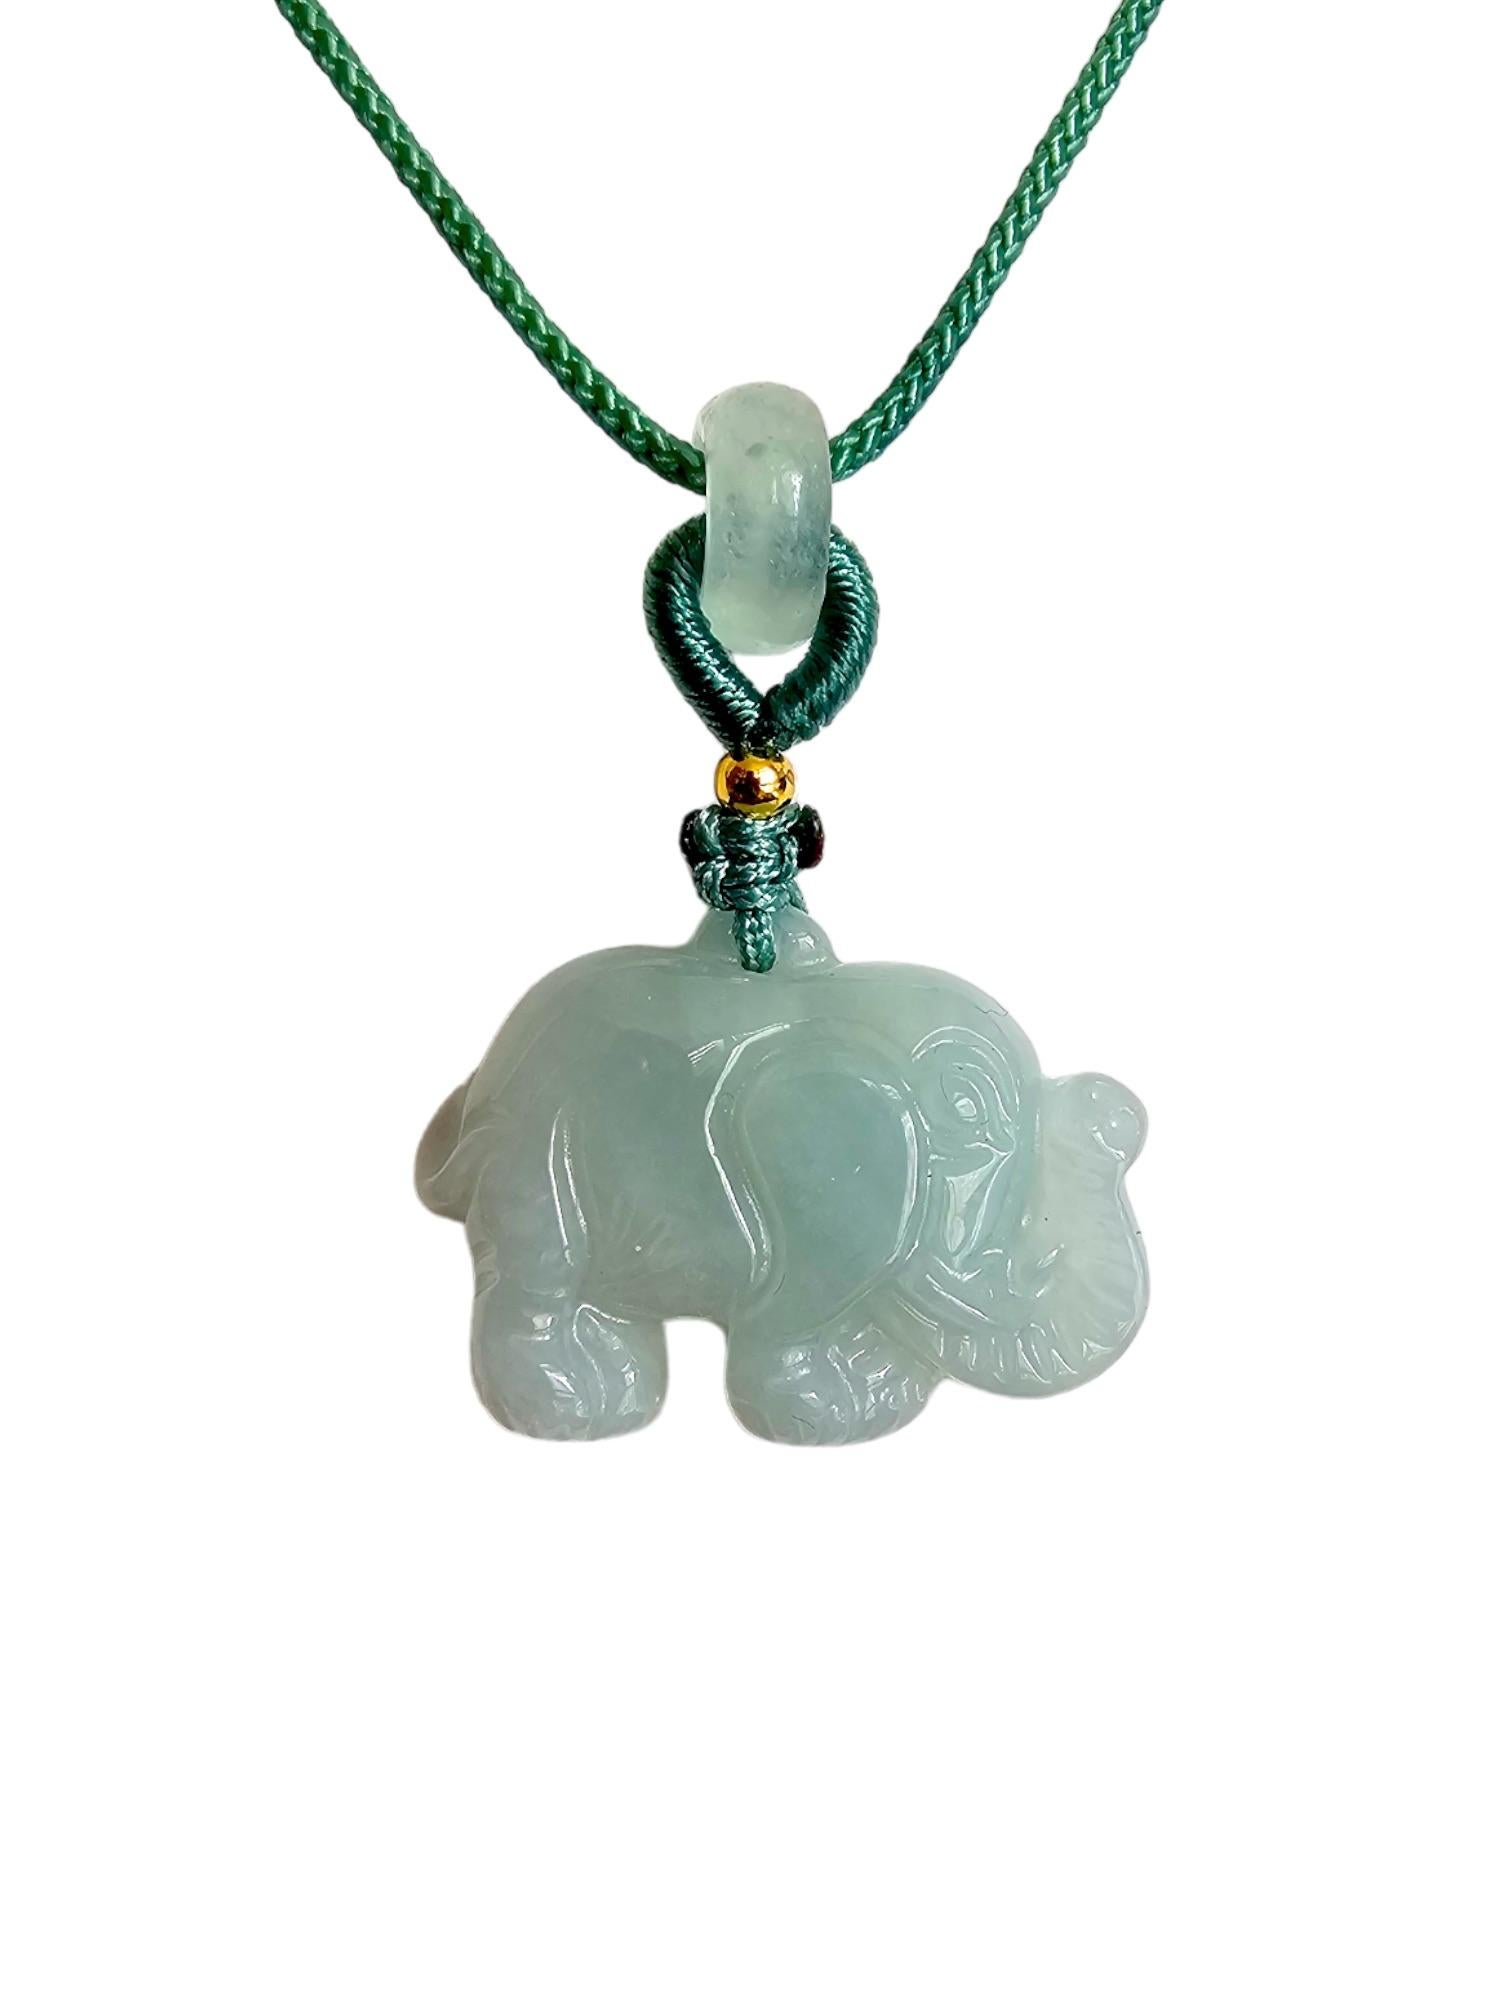 Cabochon Sapporo Burmese A-Jadeite Elephant Pendant Necklace with FYORO String For Sale